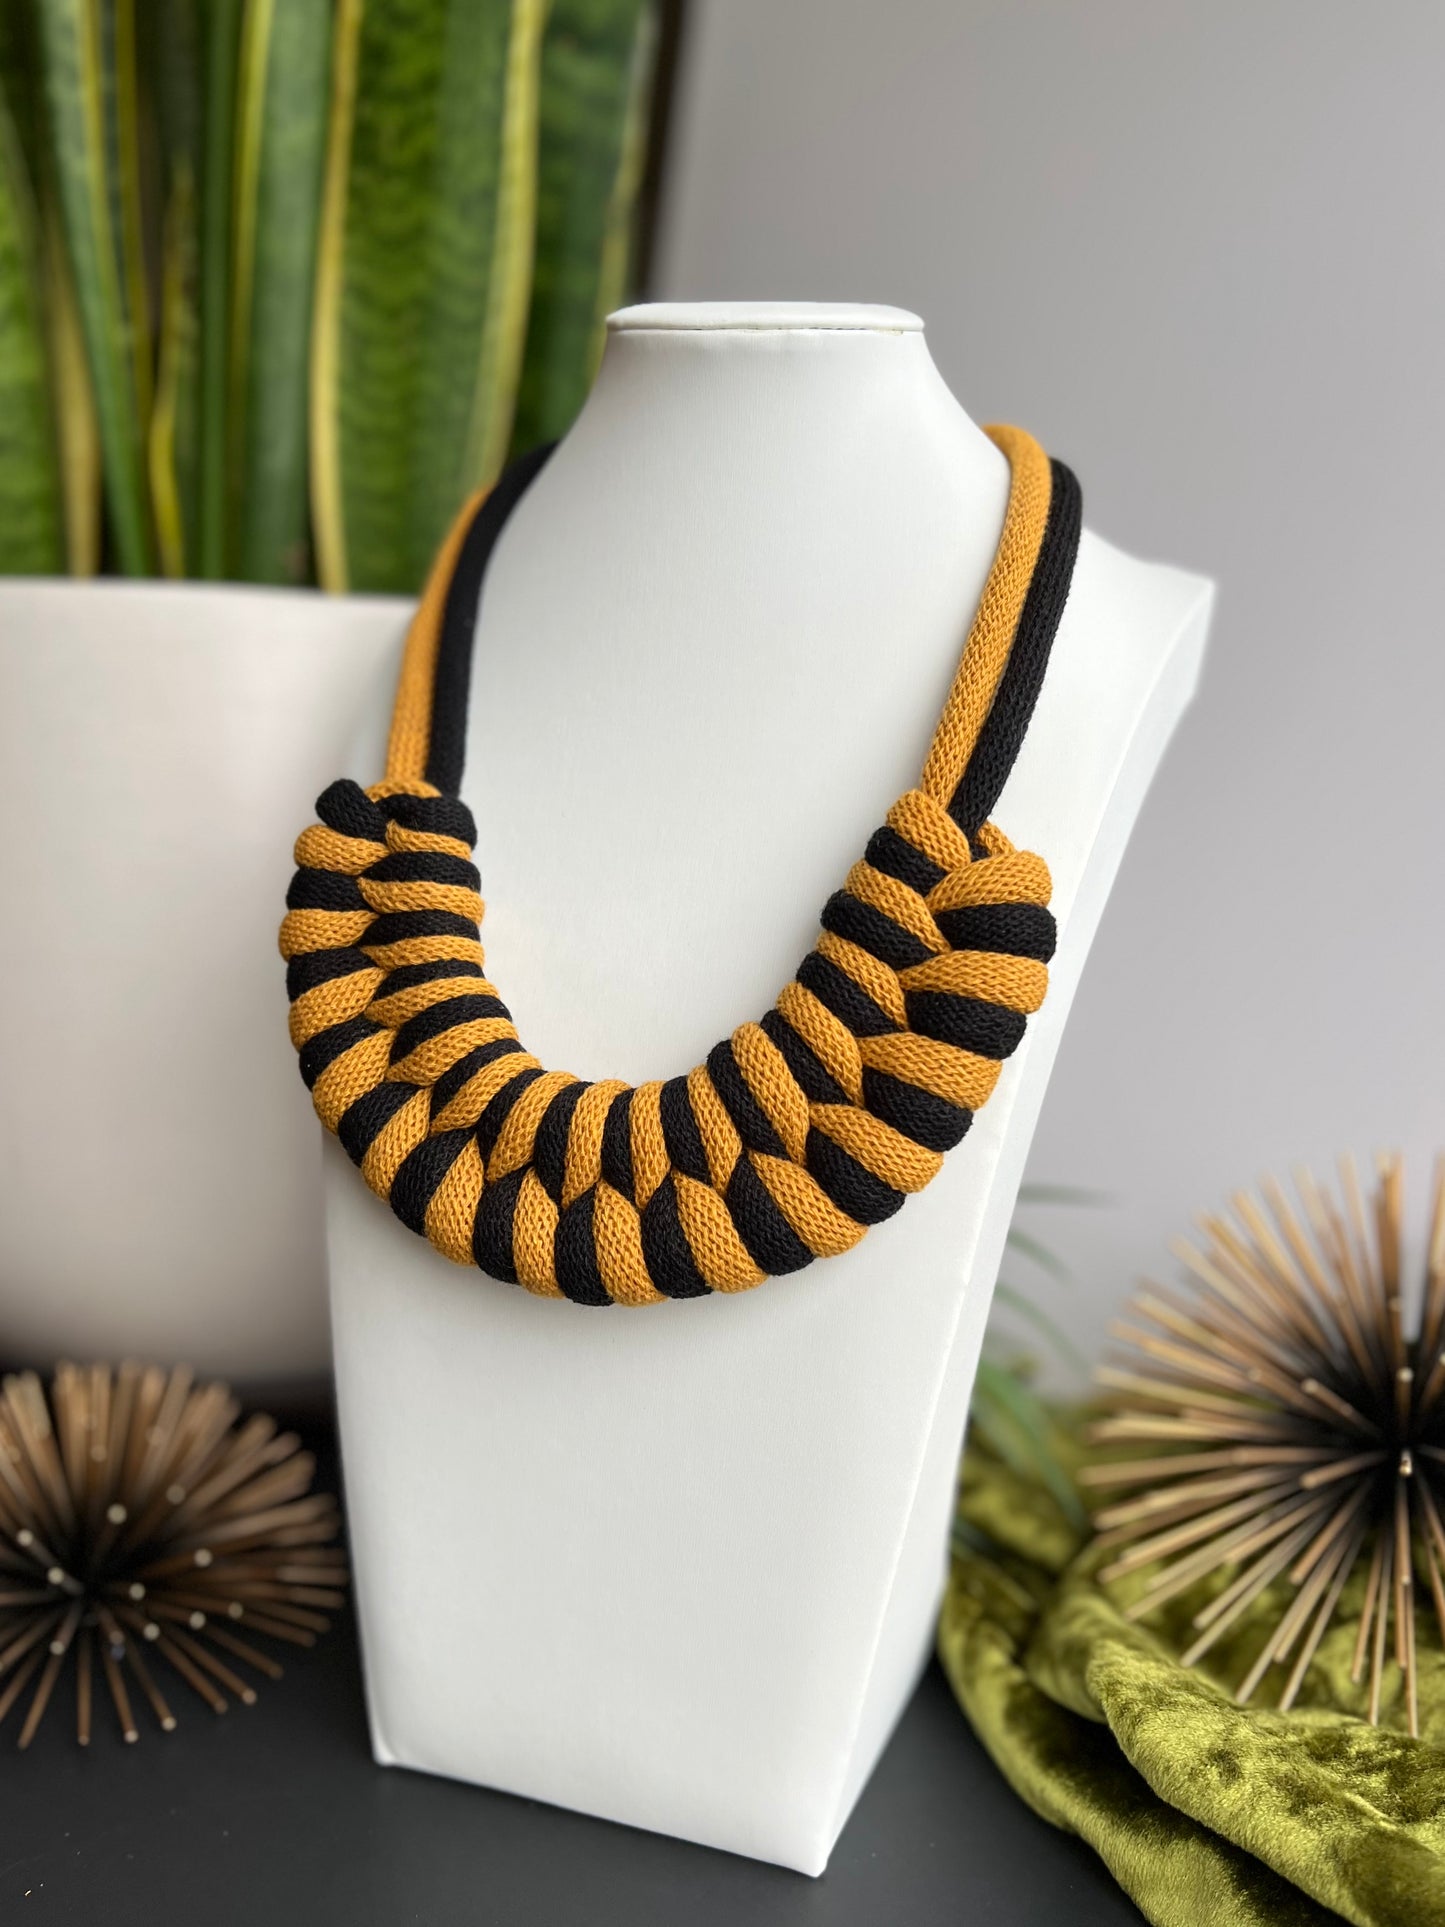 Black & Mustard yellow textile necklace